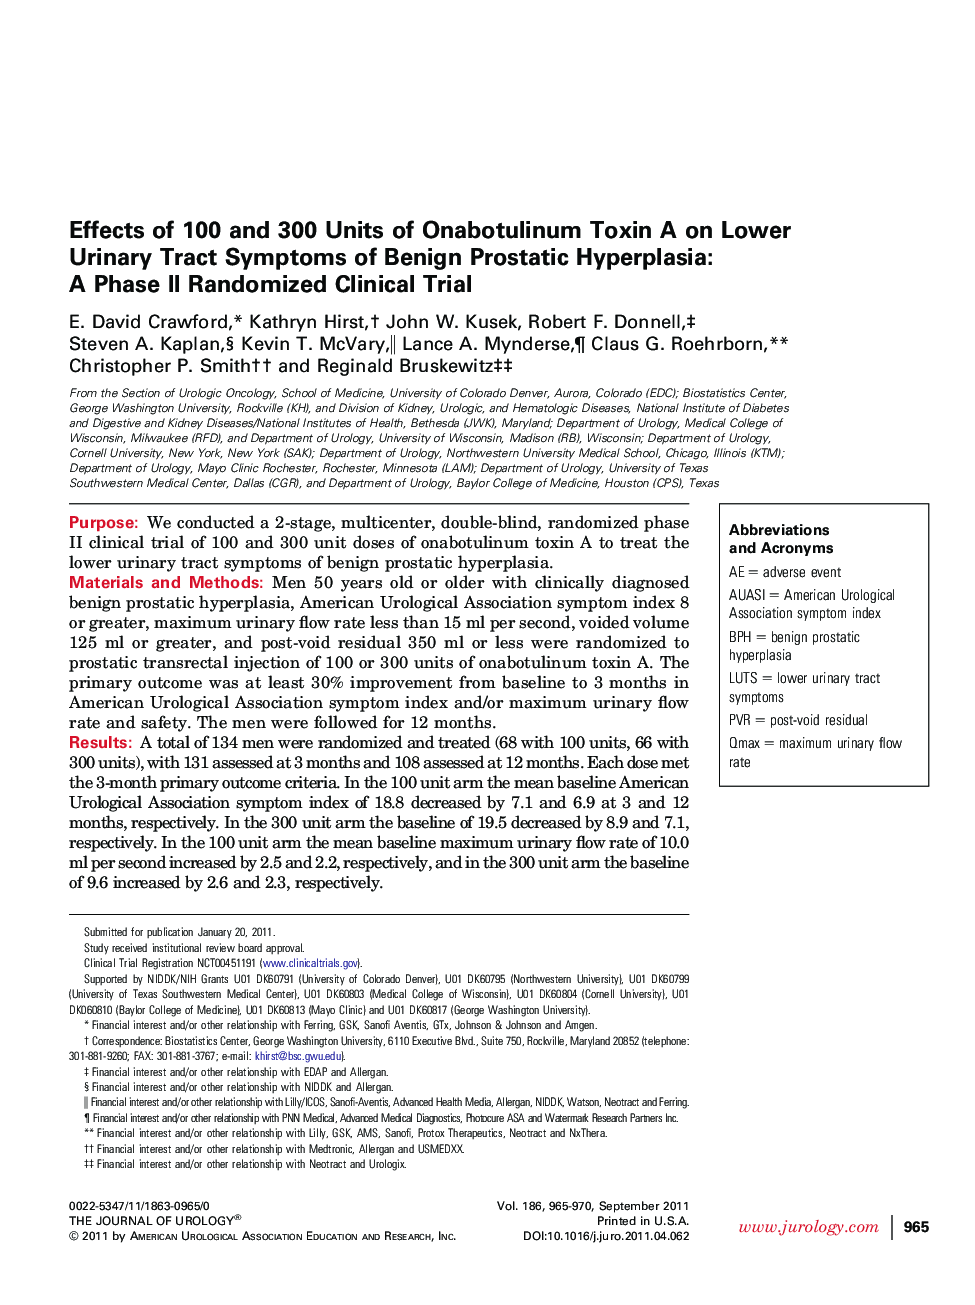 Effects of 100 and 300 Units of Onabotulinum Toxin A on Lower Urinary Tract Symptoms of Benign Prostatic Hyperplasia: A Phase II Randomized Clinical Trial